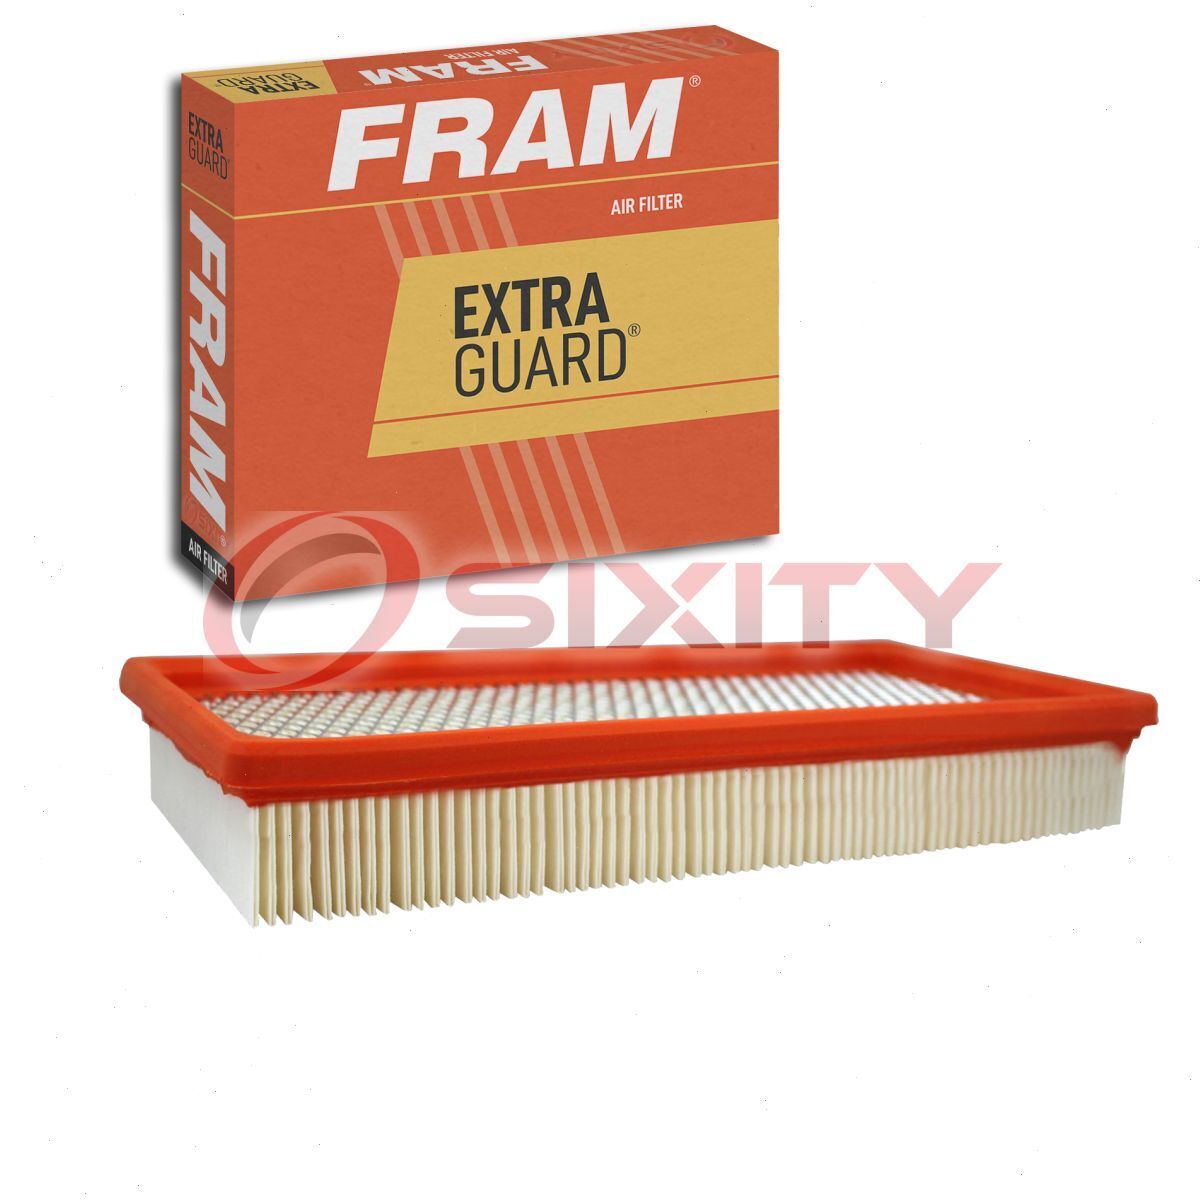 FRAM Extra Guard Air Filter for 1988-1990 Plymouth Horizon Intake Inlet to